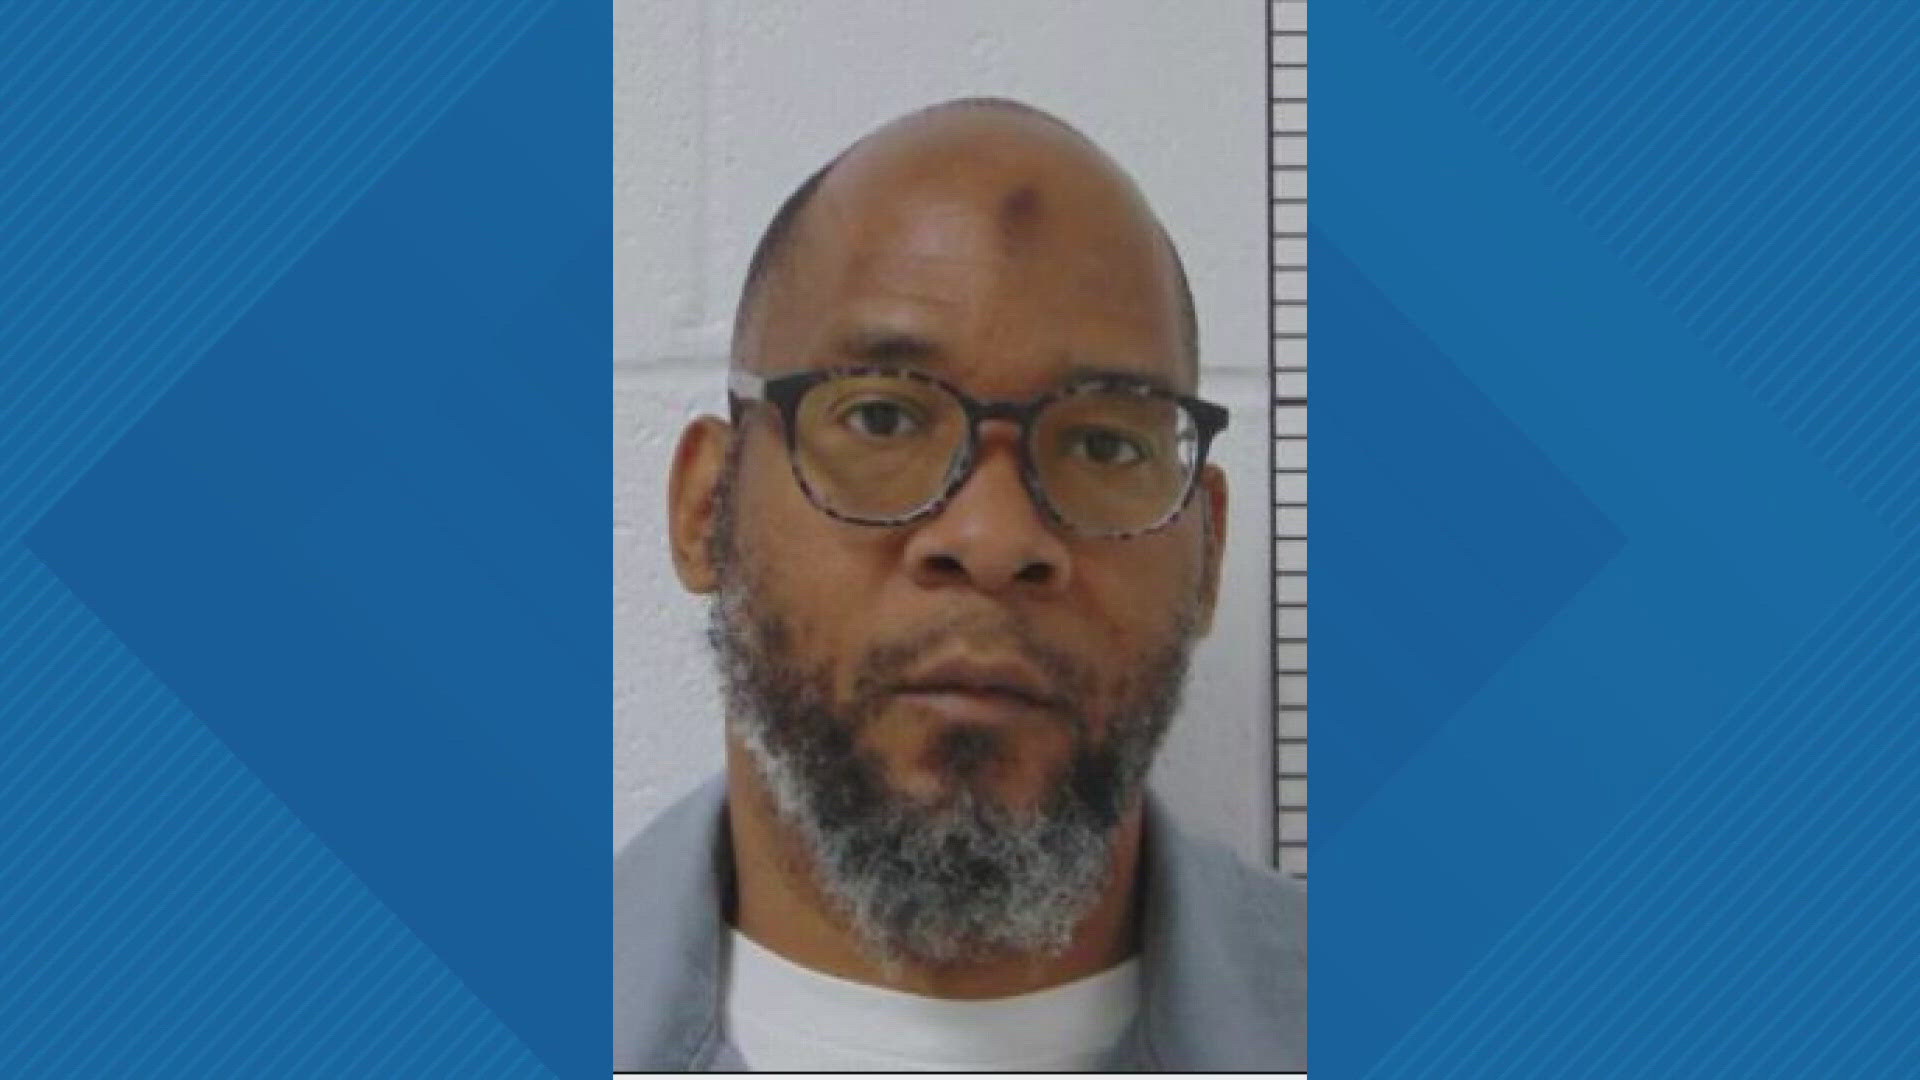 St. Louis County Prosecuting Attorney Wesley Bell filed a court motion Friday to vacate the conviction of Williams. He narrowly escaped execution seven years ago.